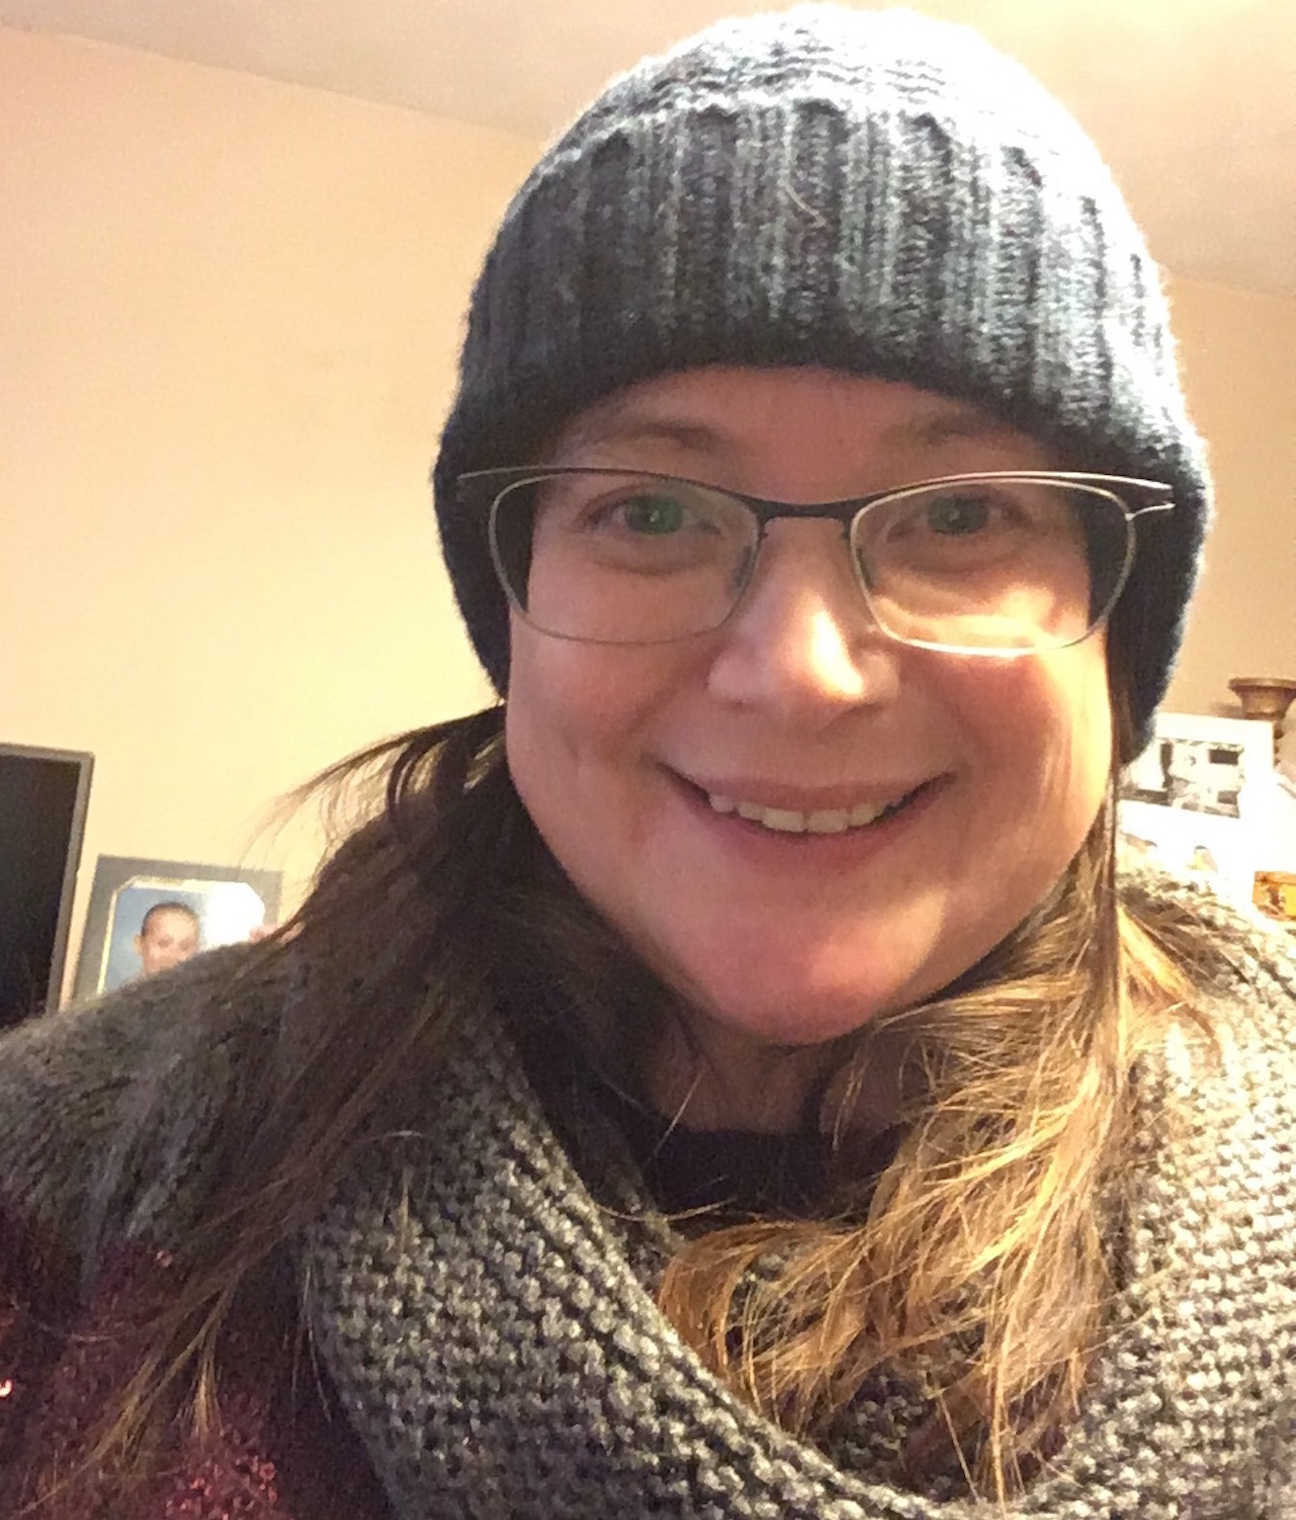 Woman smiling, wearing a beanie and glasses